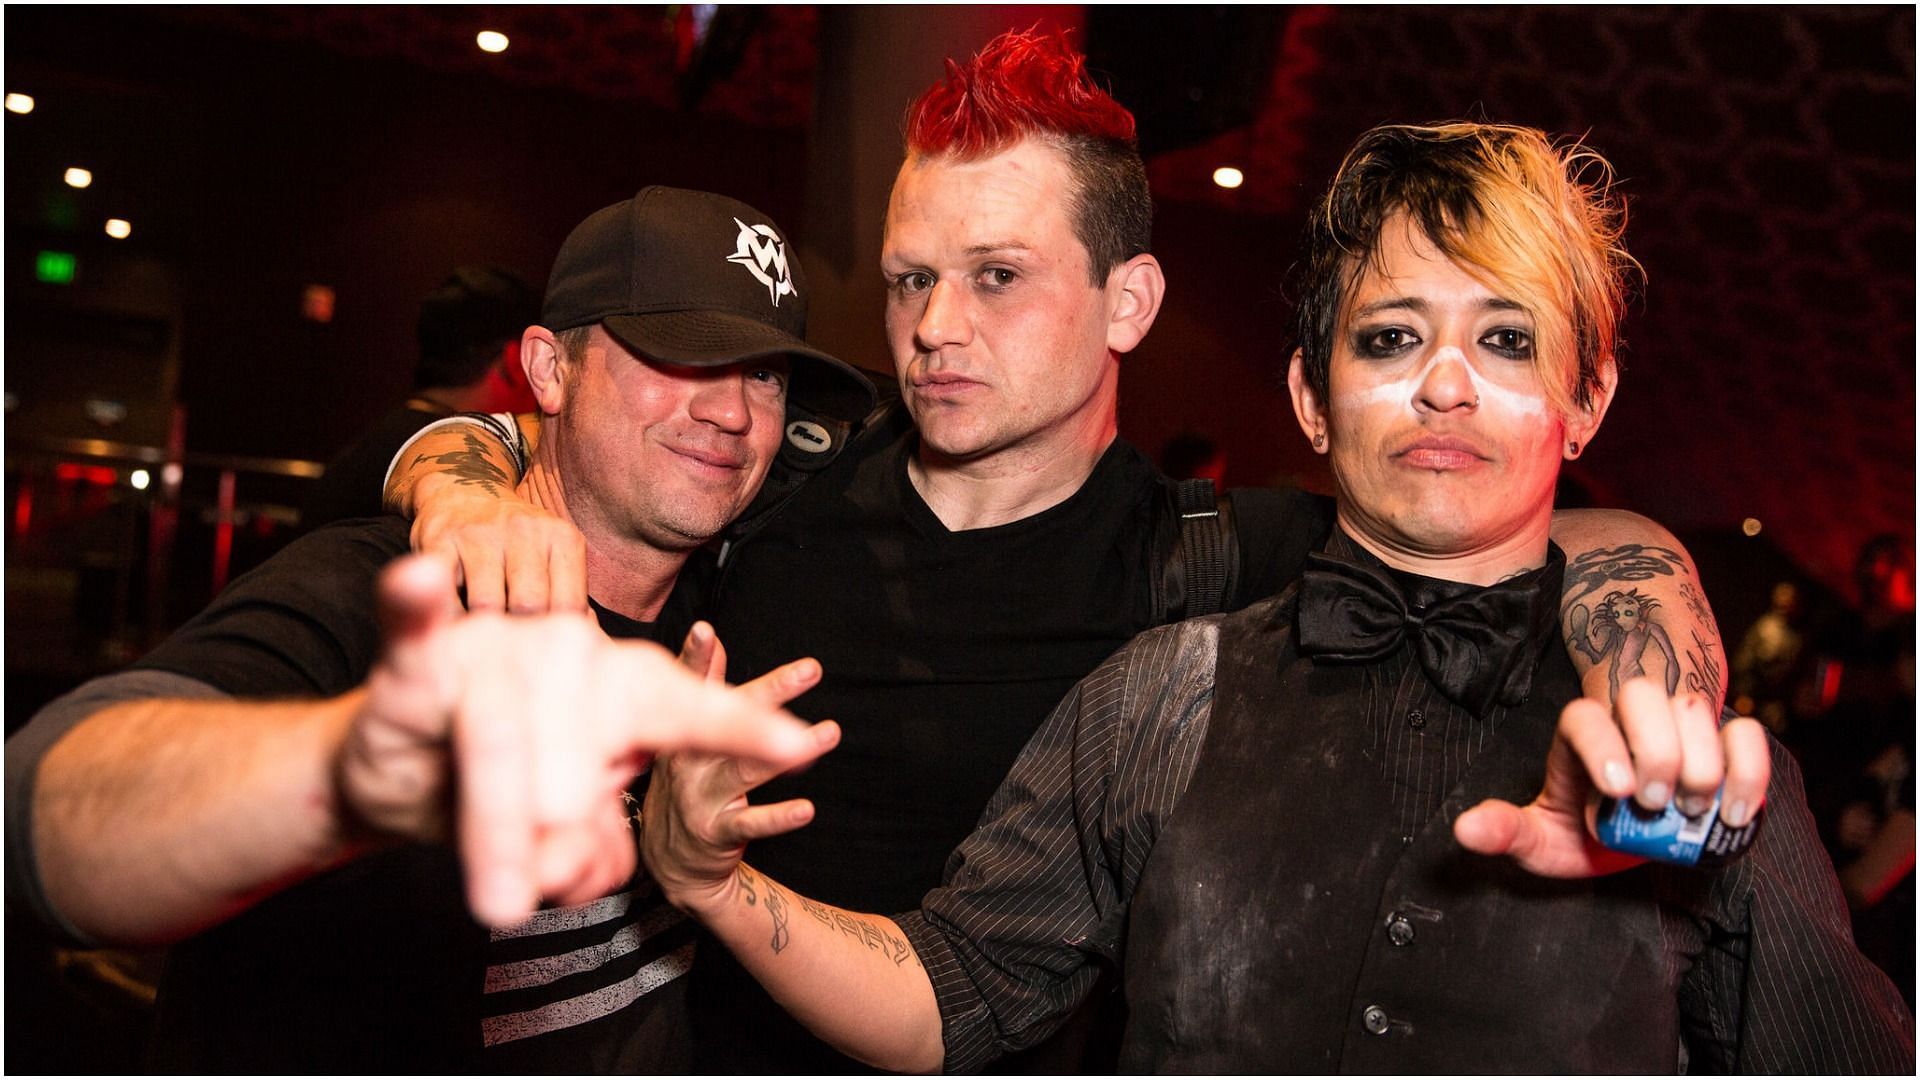 Vince Hornsby of Sevendust, drummer Mikey &quot;Bug&quot; Cox of Coal Chamber and guitarist Meegs Rascon of Coal Chamber (Image via Chelsea Lauren/Getty Images)